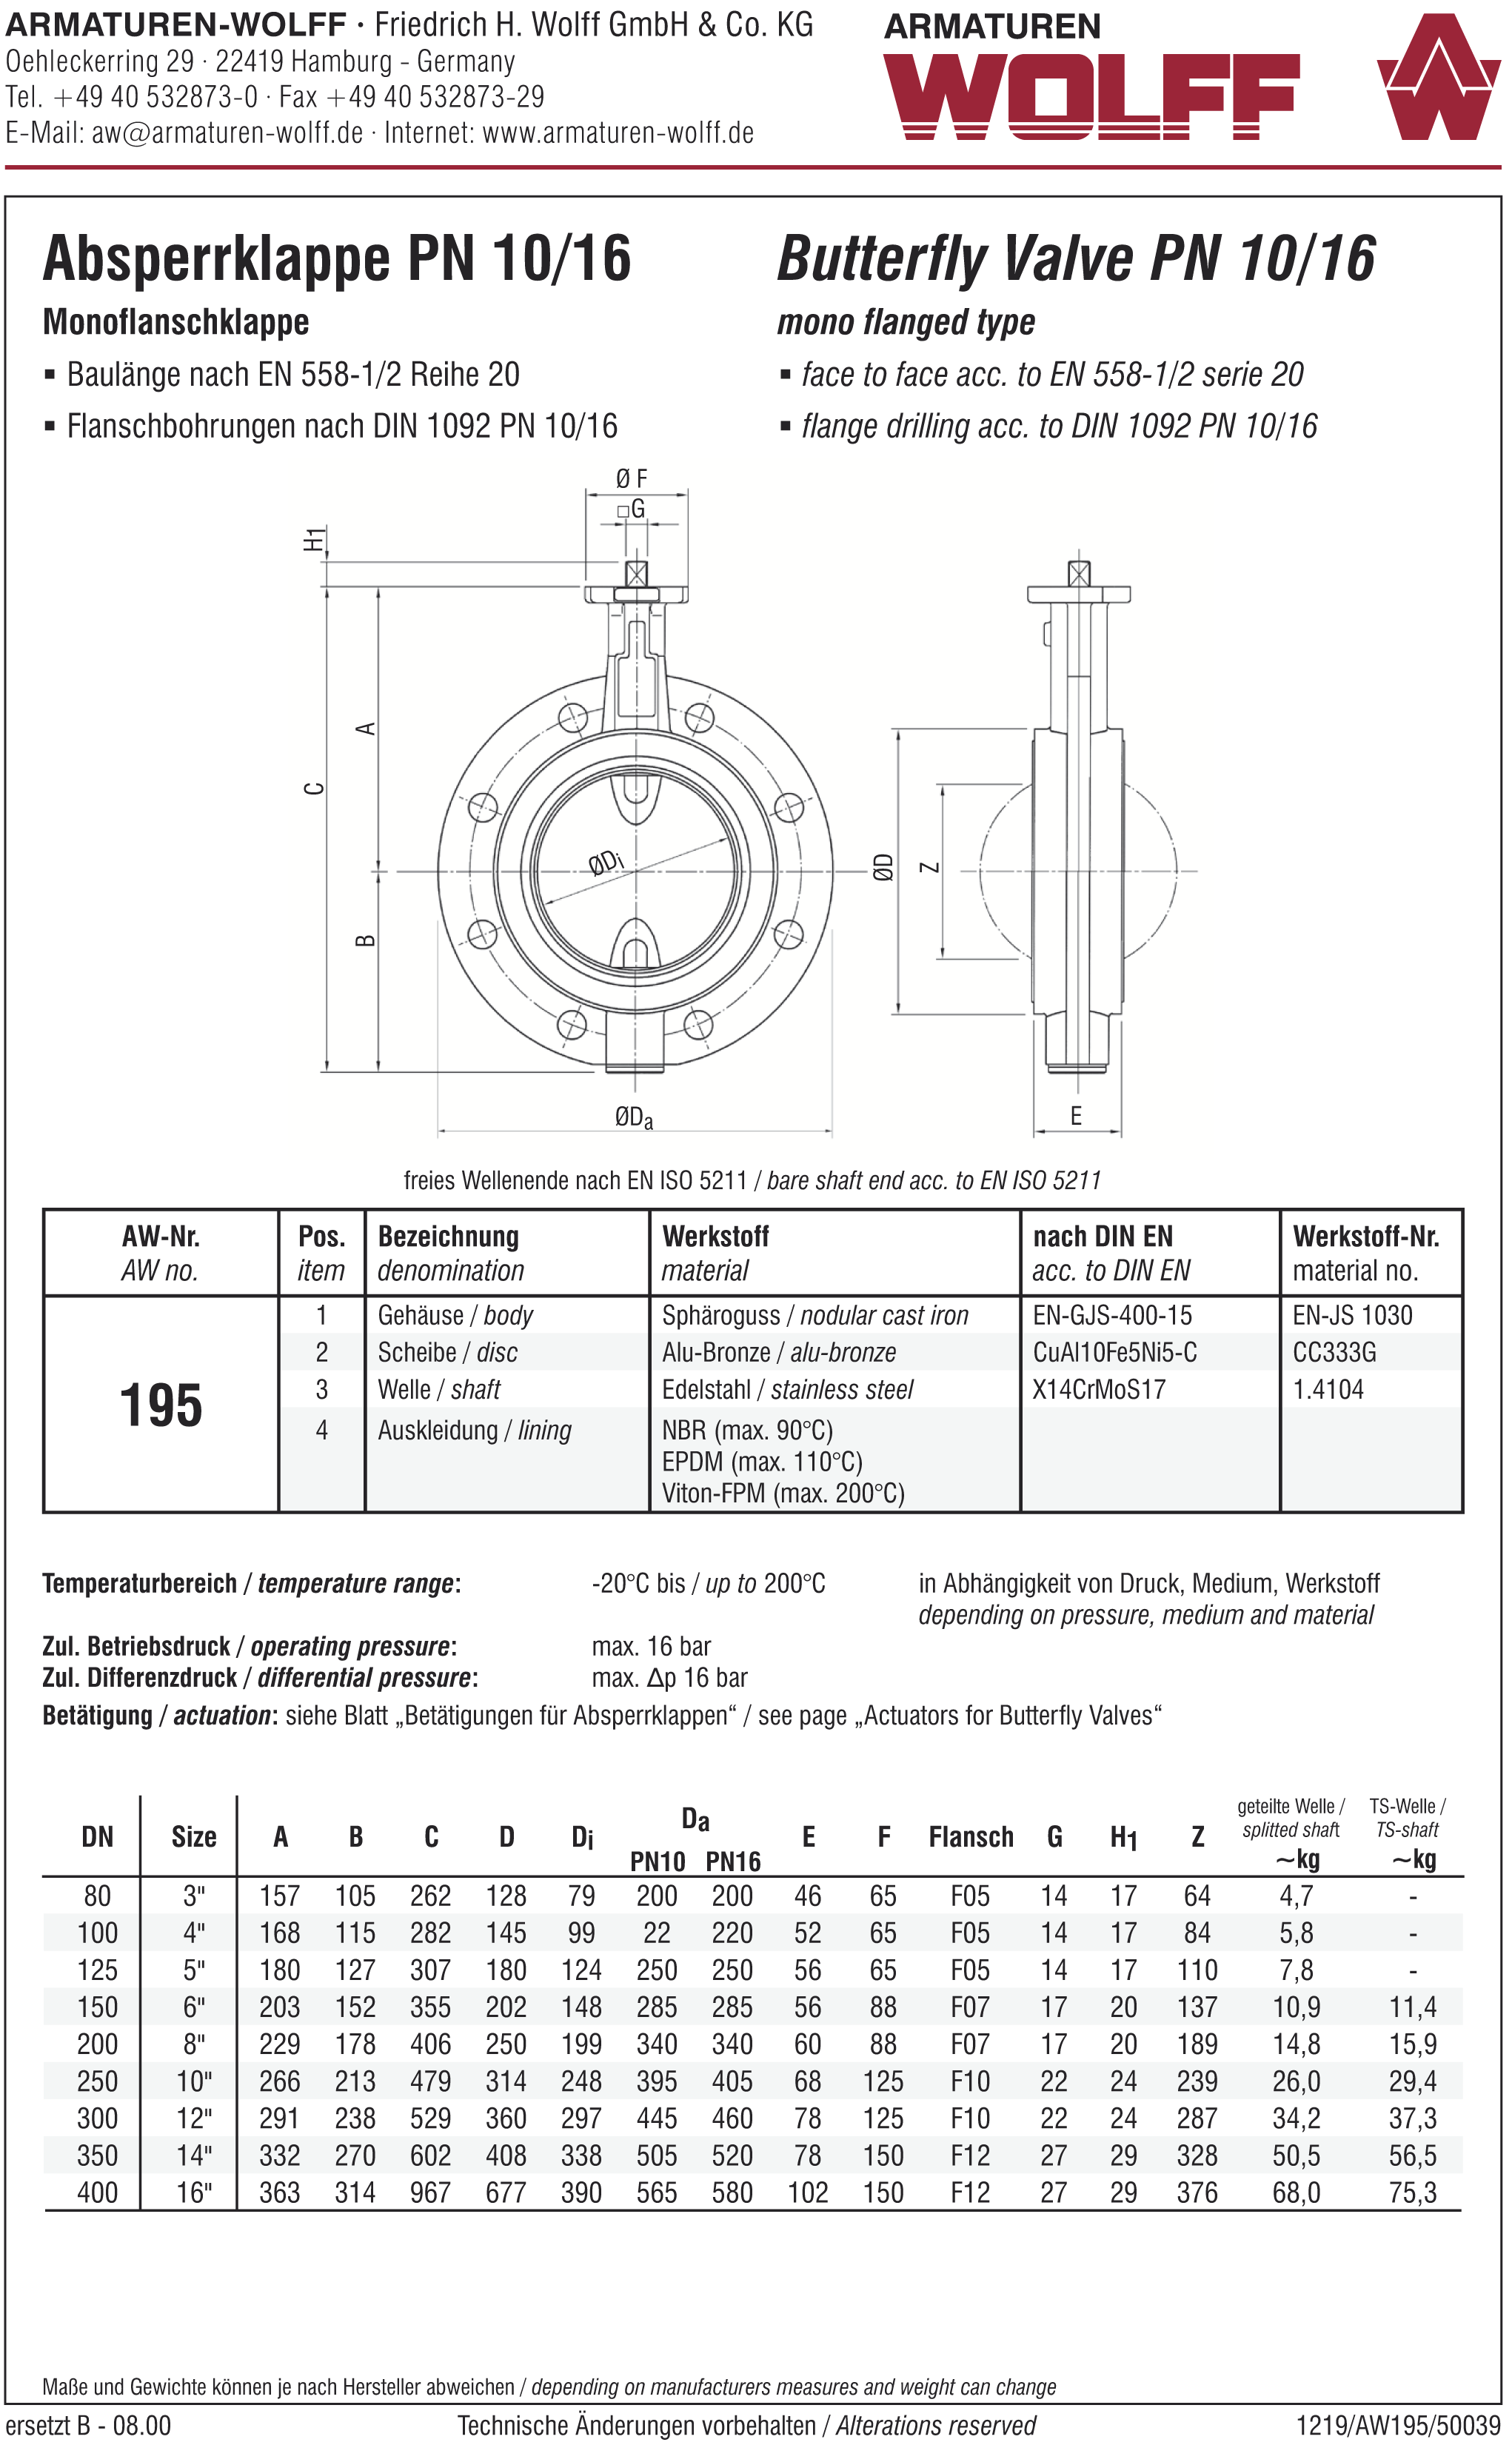 AW 195 Butterfly Valve, mono flanged type